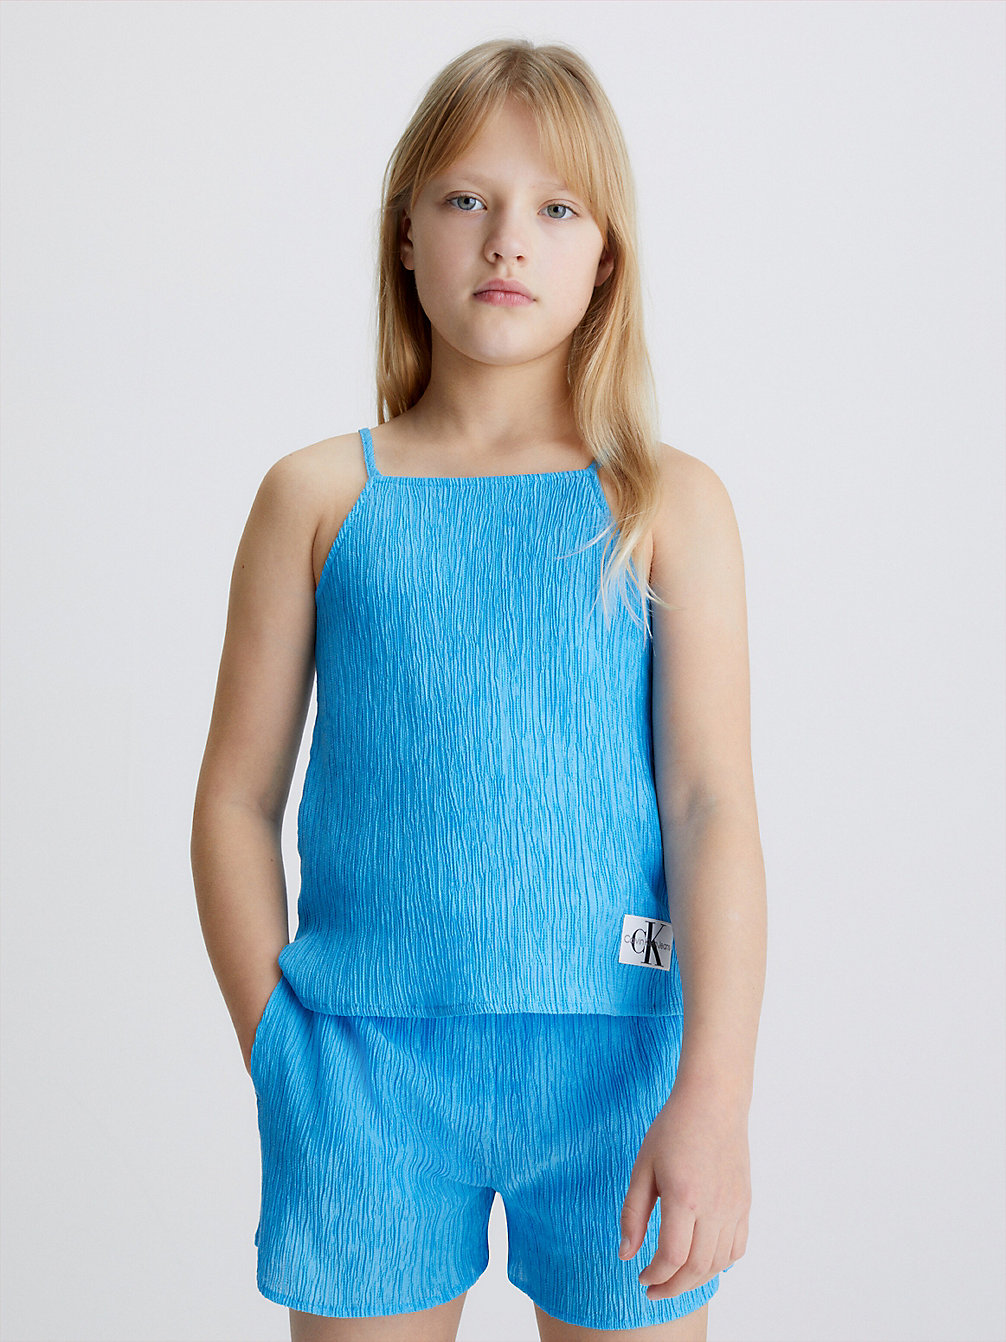 BLUE CRUSH Crinkle Lyocell Cami Top undefined girls Calvin Klein